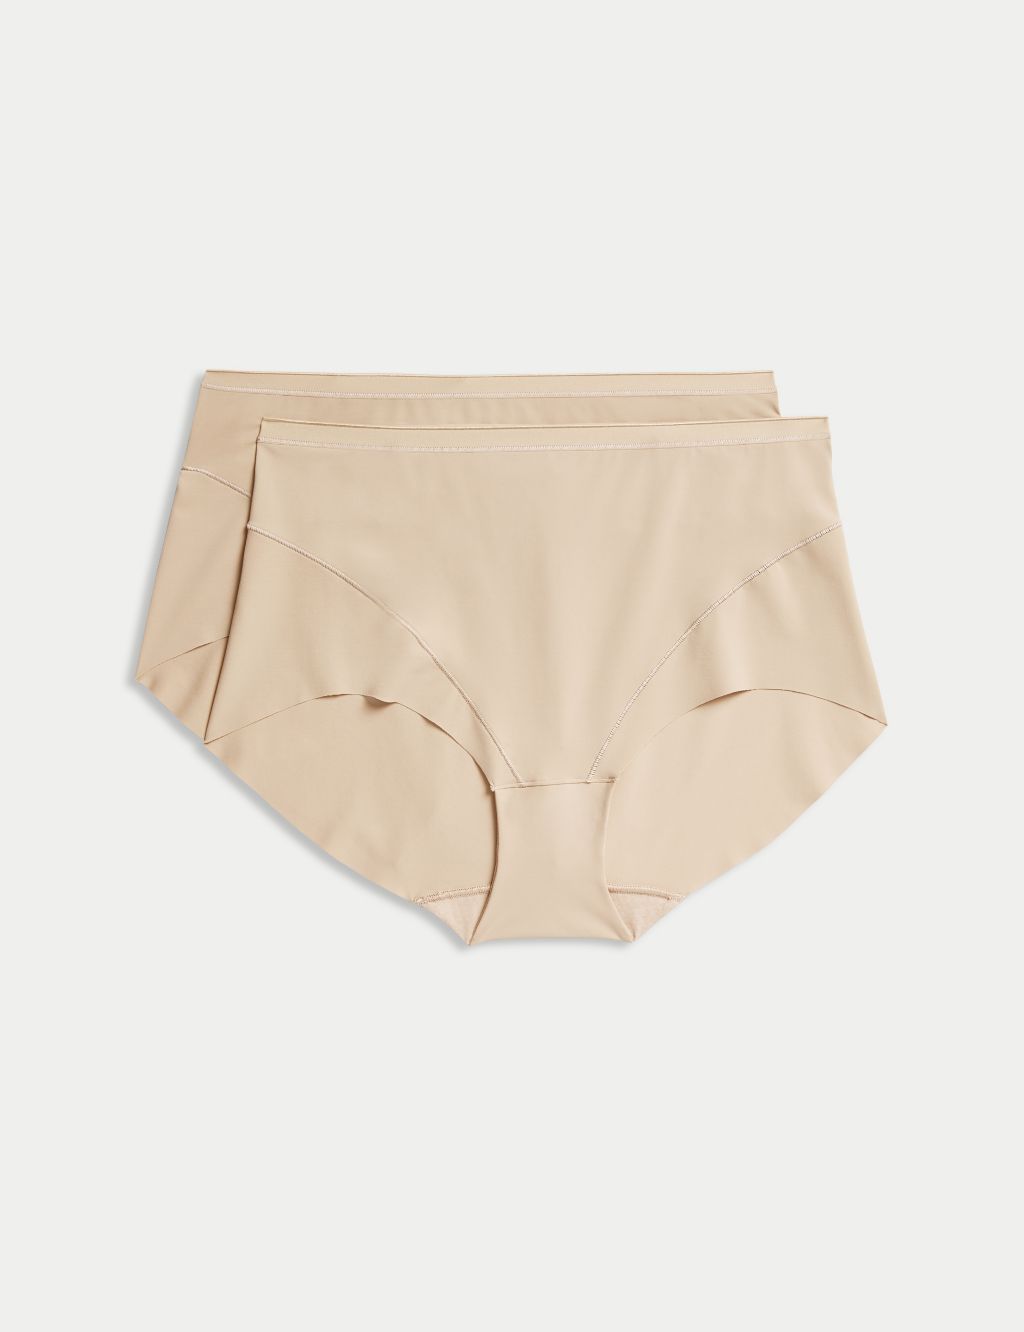  Calvin Klein Girls' Hipster Panty Seamless Underwear,  Multipack, Buff Beige/Black Coffee/Nude: Clothing, Shoes & Jewelry